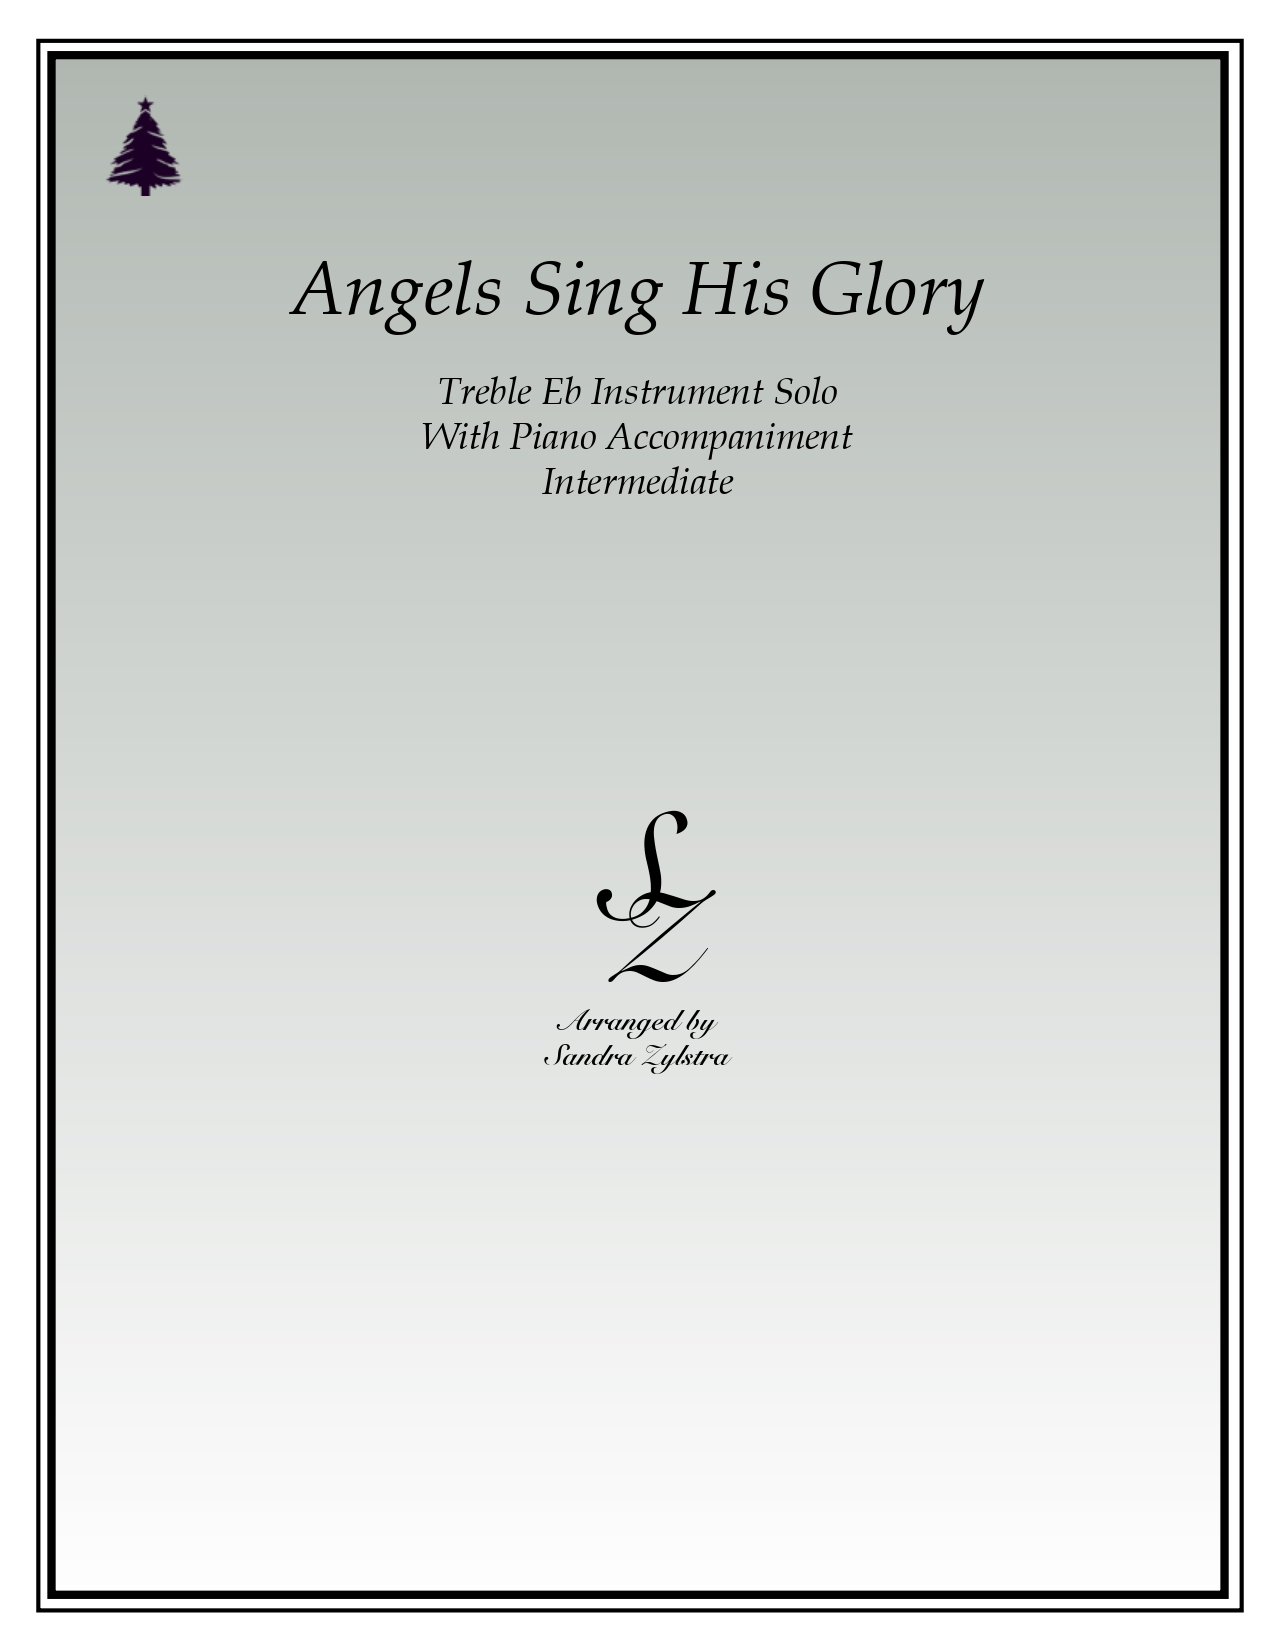 Angels Sing His Glory Eb instrument solo part cover page 00011